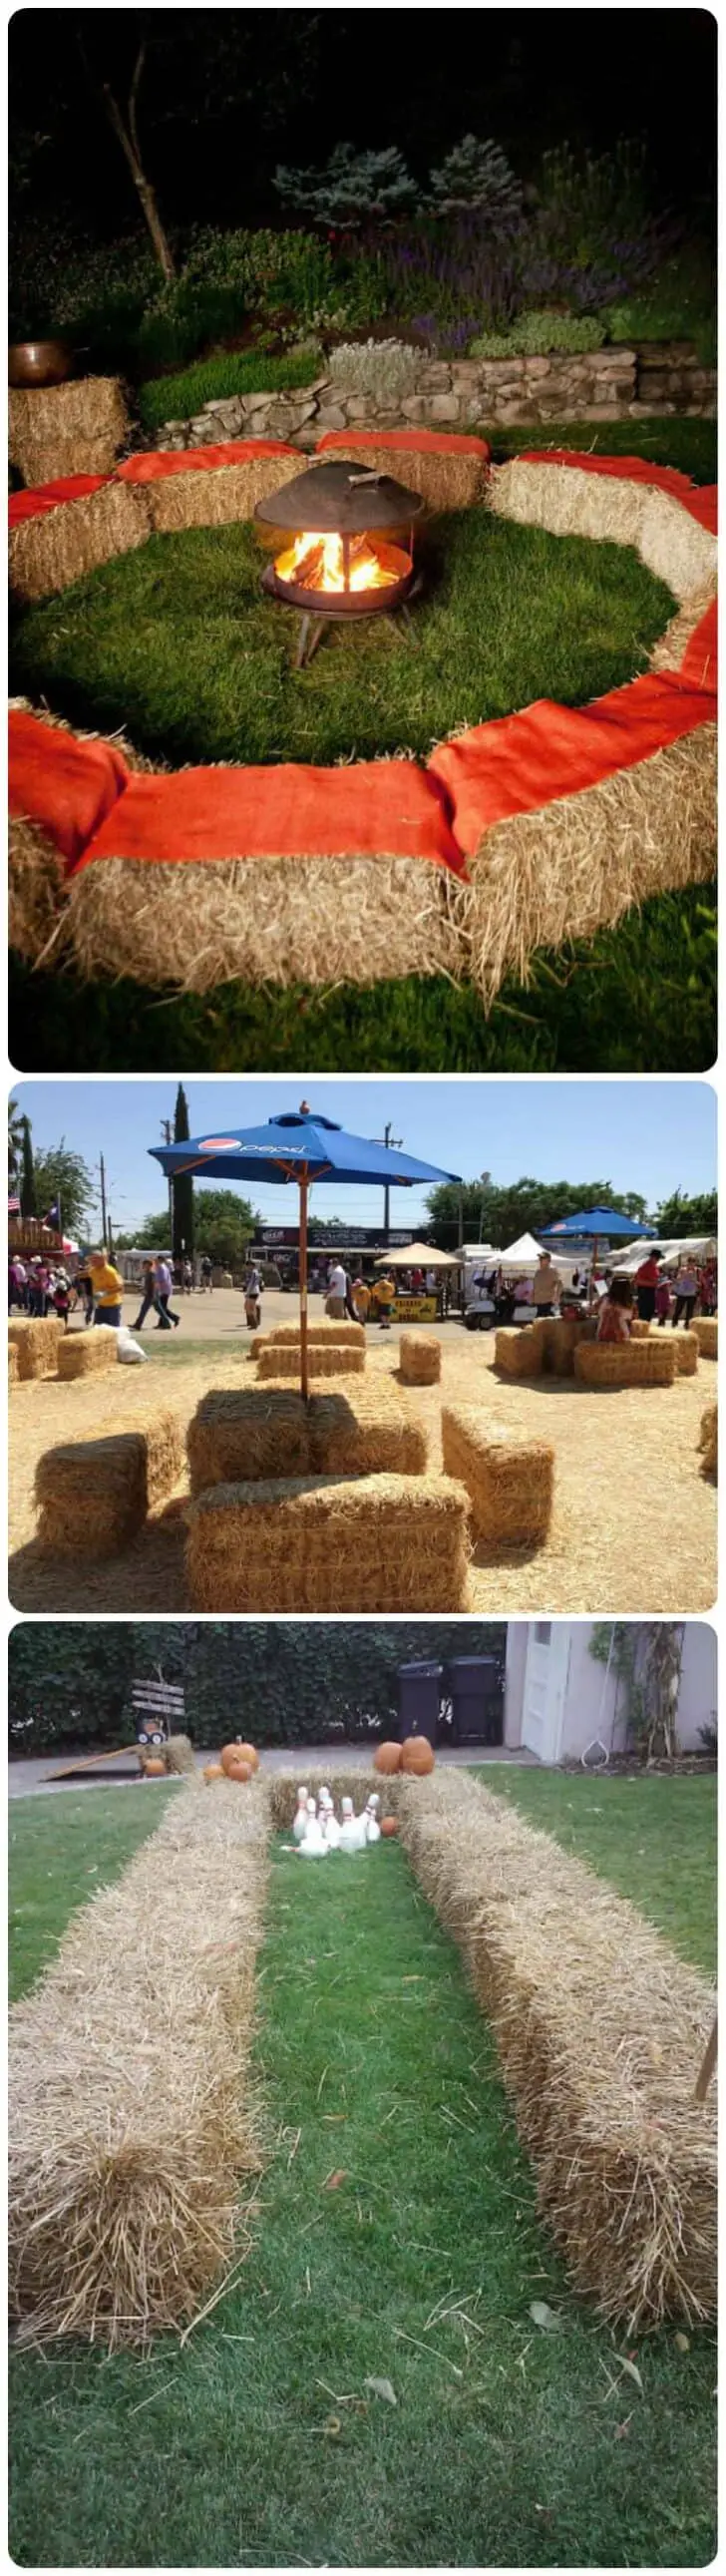 18 Ways to Use Straw Bales for a Shabby Chic Wedding/Garden Party 30 - Patio & Outdoor Furniture